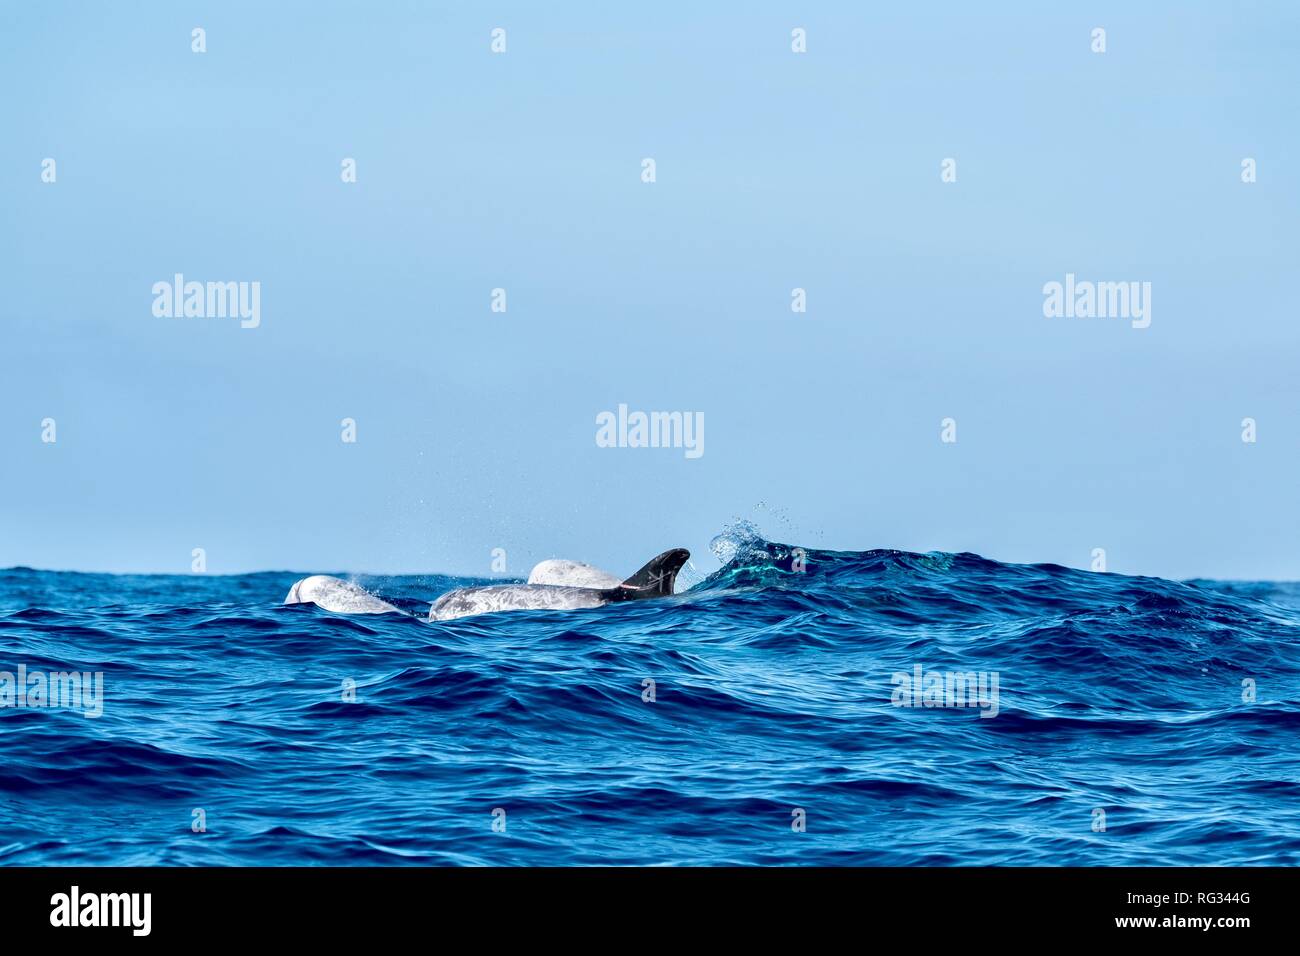 Risso's dolphins surfacing behind a wave Stock Photo